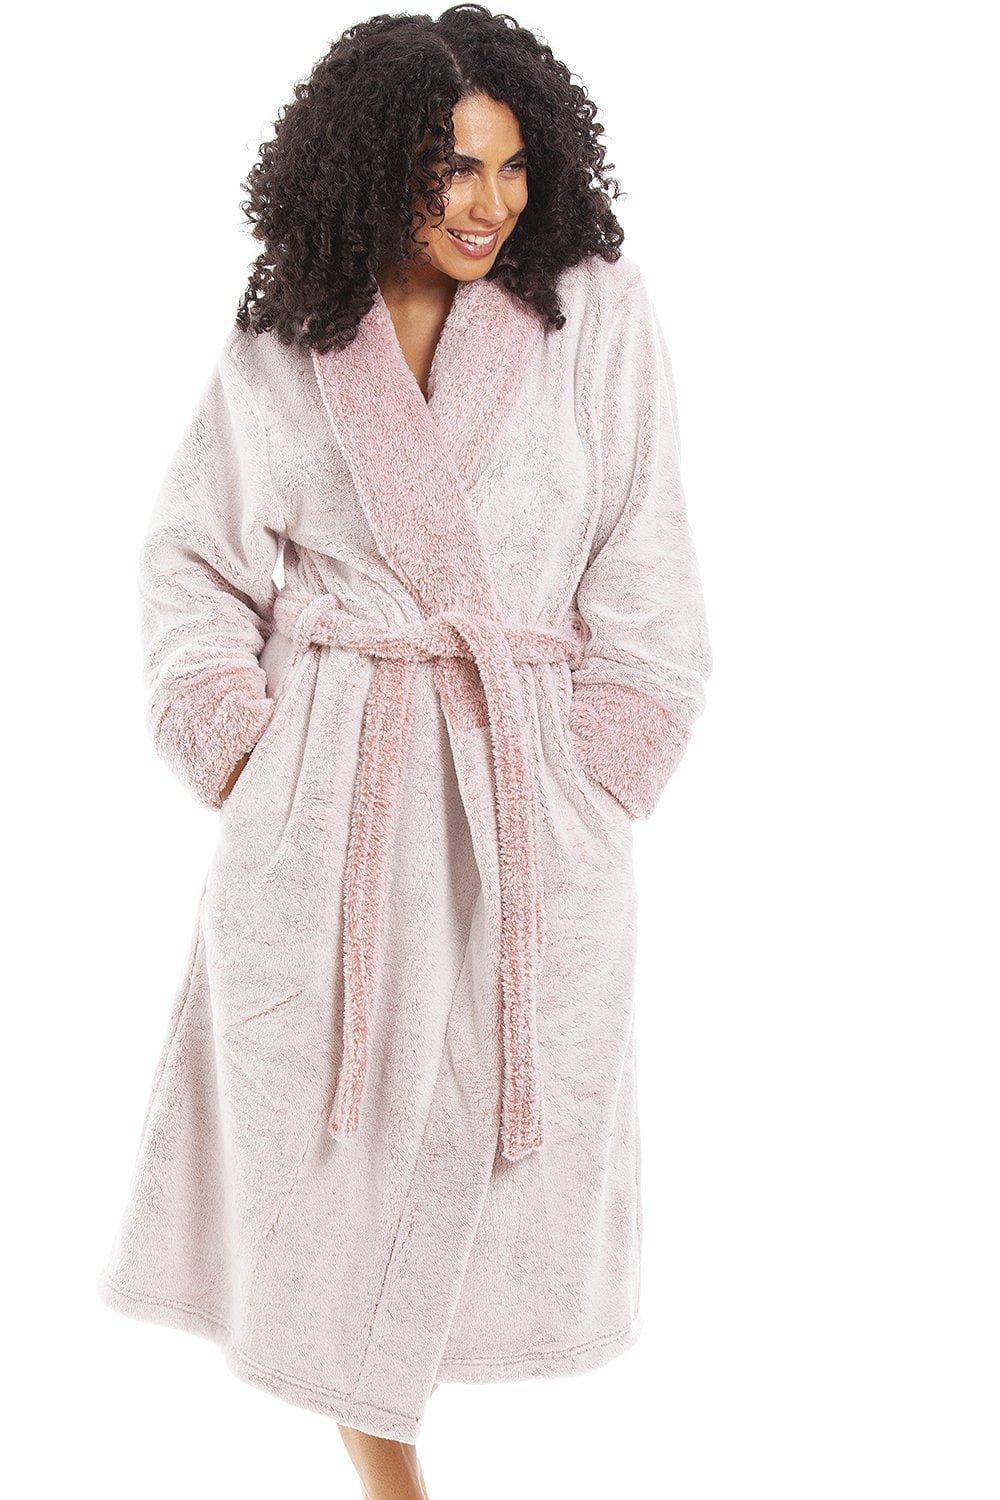 Pink Floral Ladies Dressing Gown – Forever England